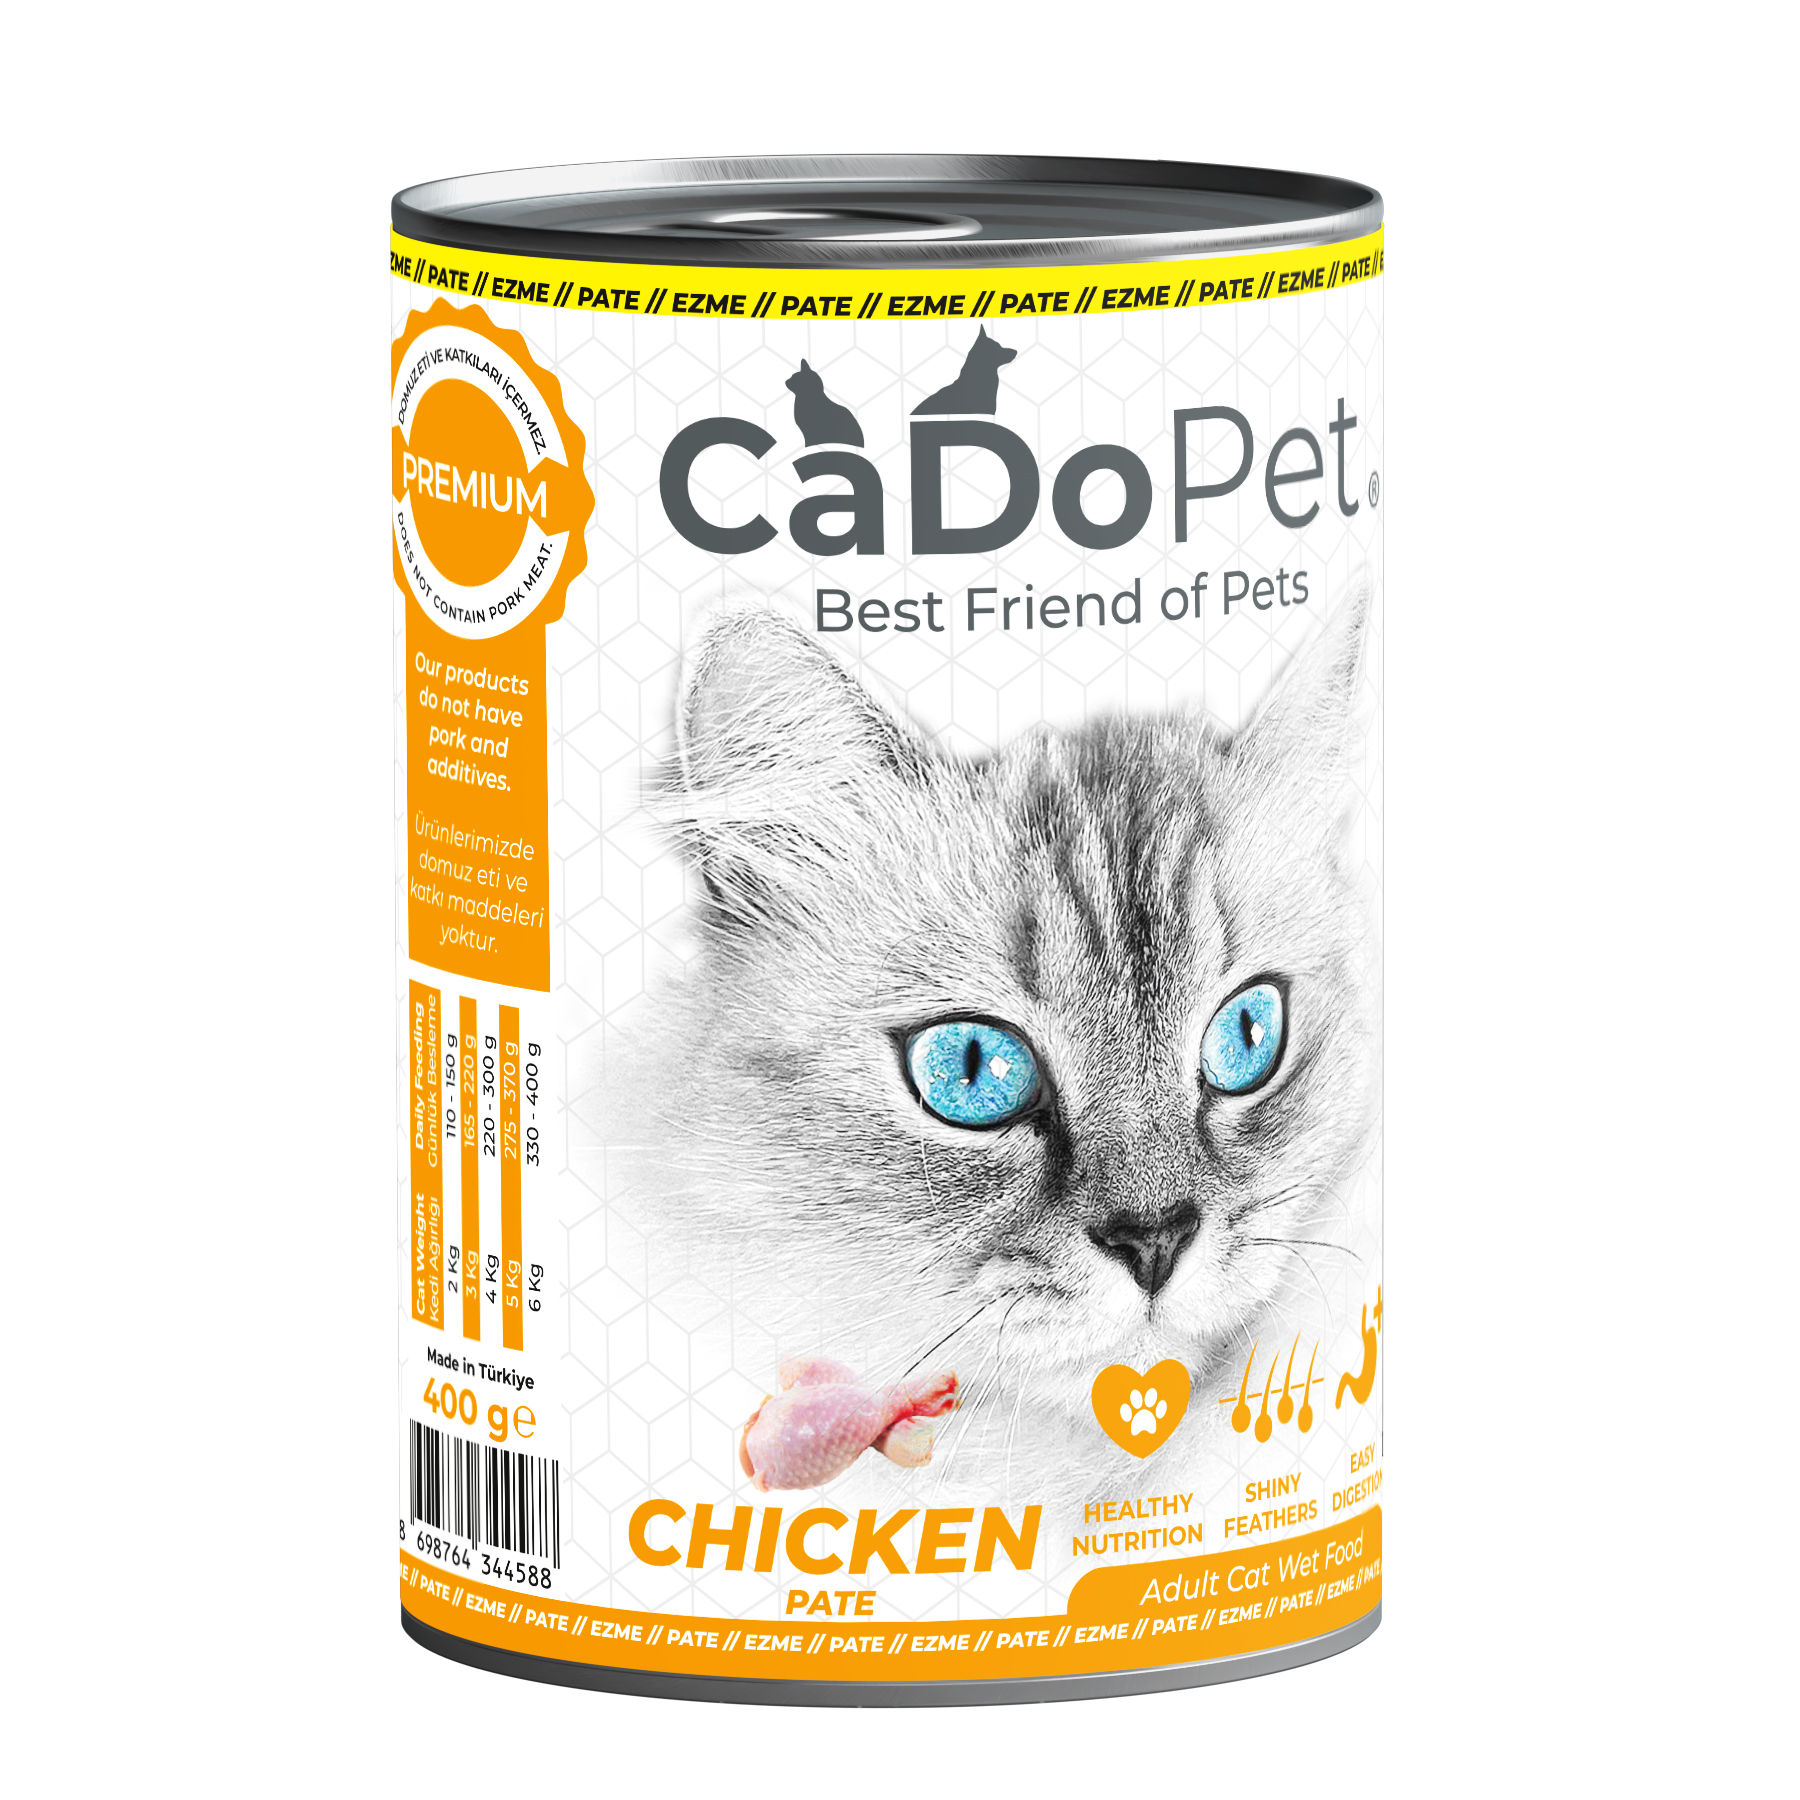 .Adult Cat Wet Food 400g with Chicken Pate.